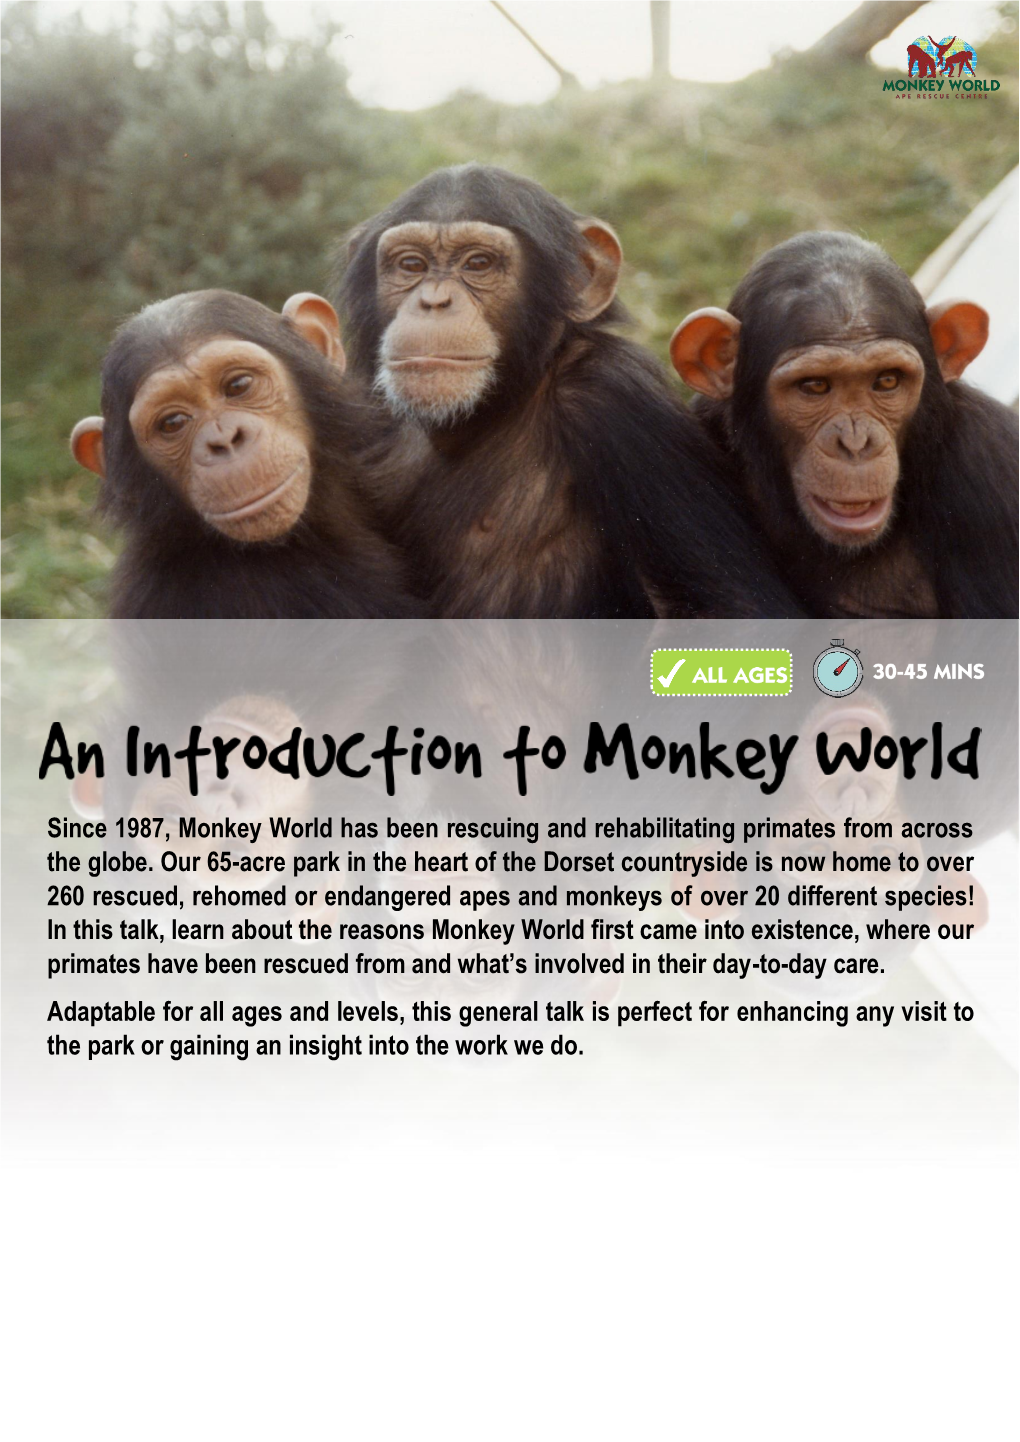 Since 1987, Monkey World Has Been Rescuing and Rehabilitating Primates from Across the Globe